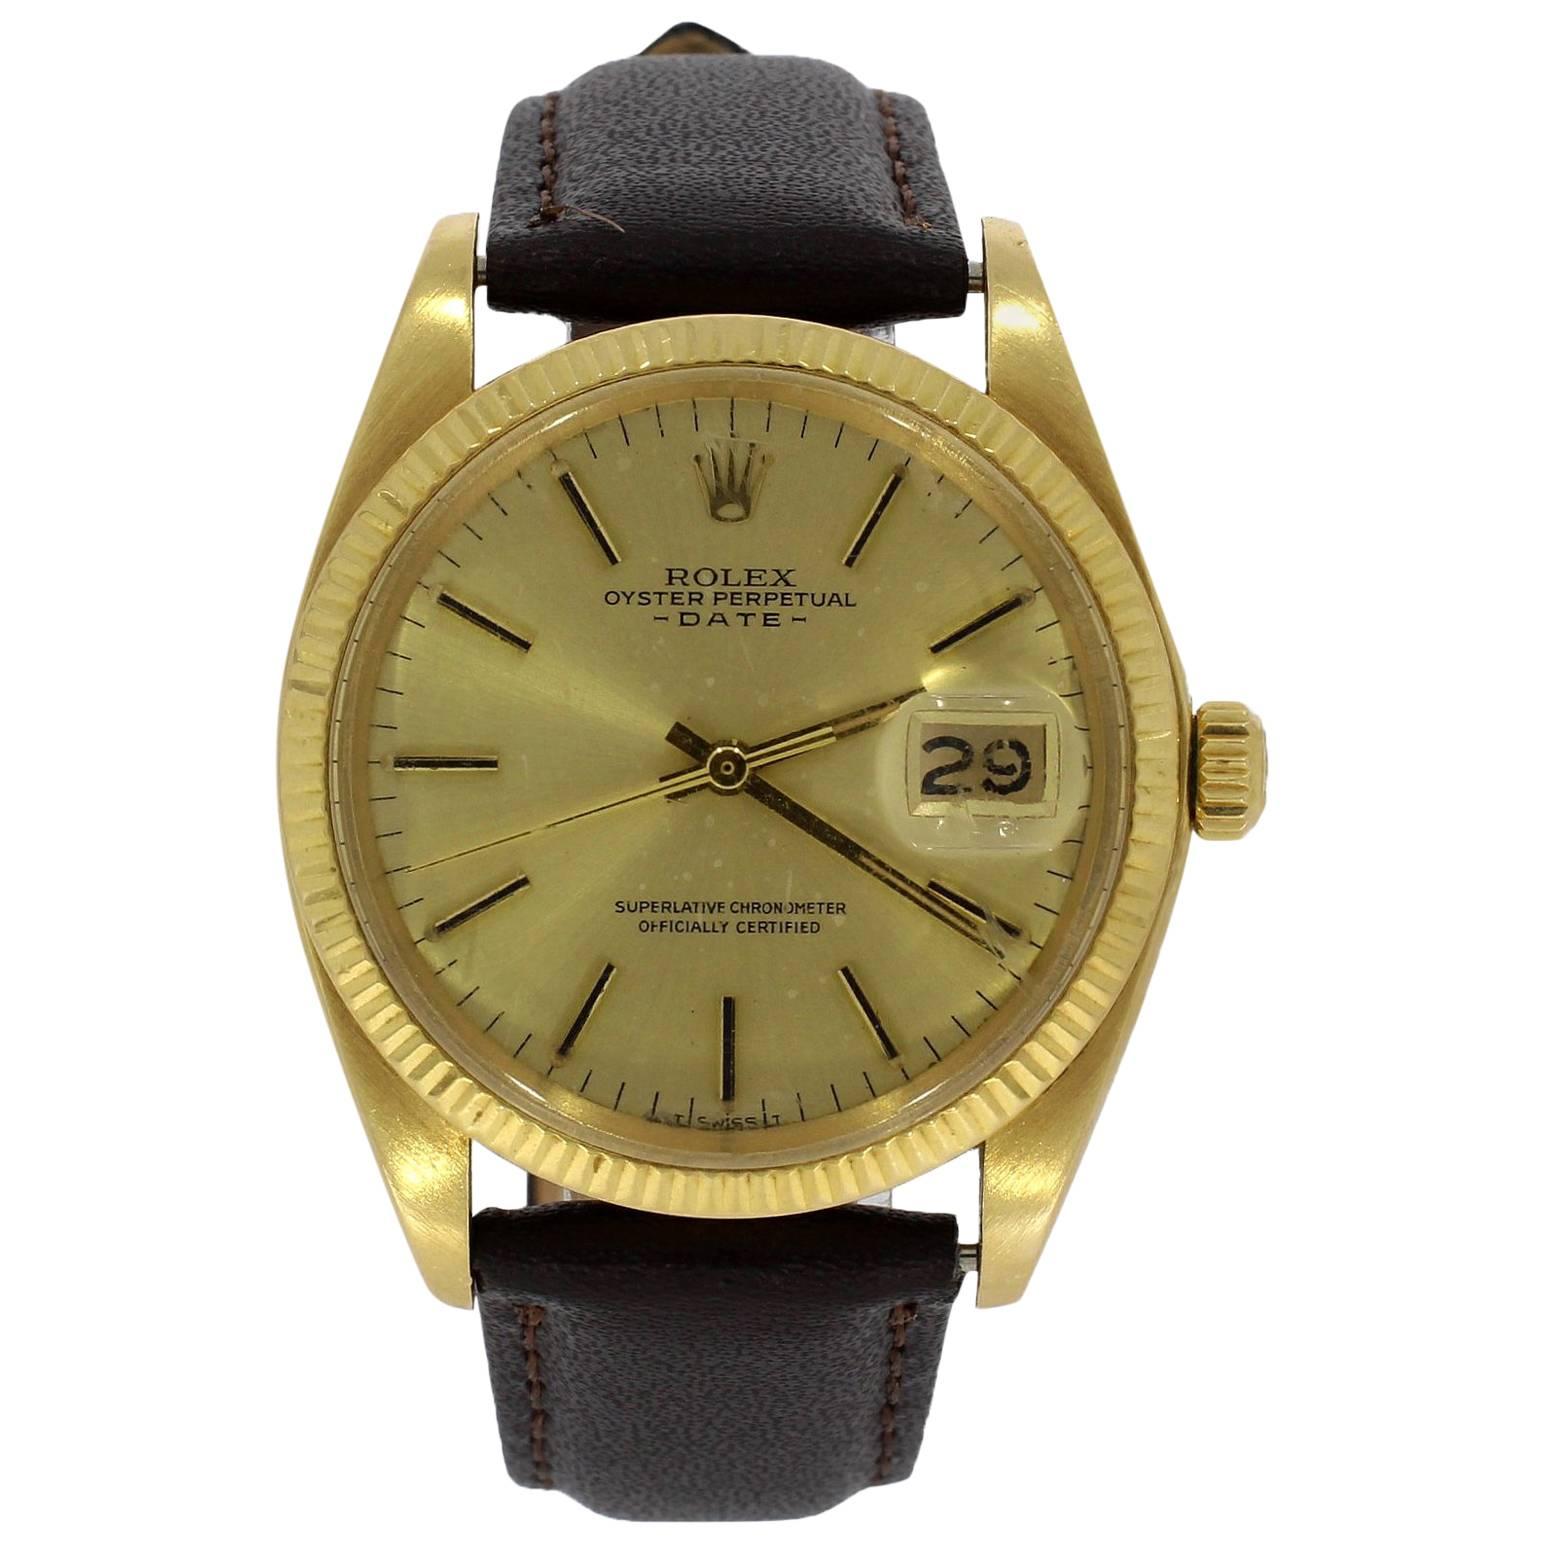 Rolex Yellow Gold Date Calibre 1570 Wristwatch Ref 1503, 1977 For Sale